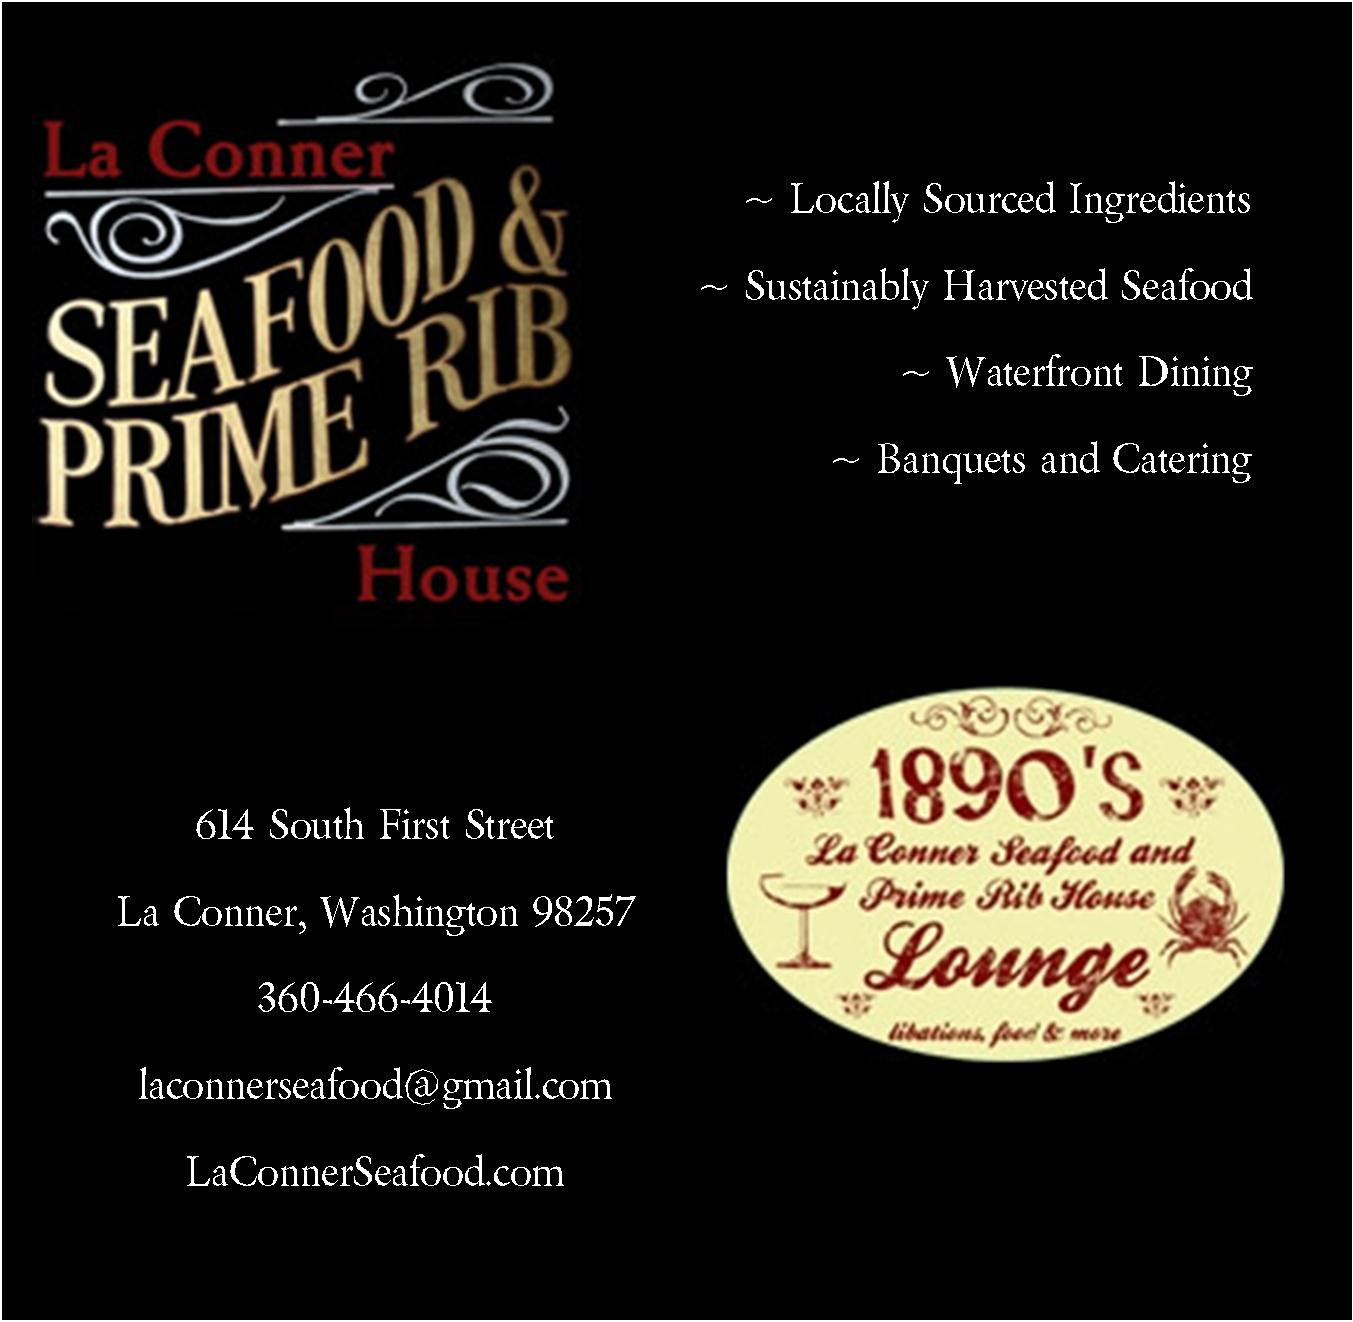 La Conner Seafood And Prime Rib
 La Conner Skateboard Park Families and Kids Services